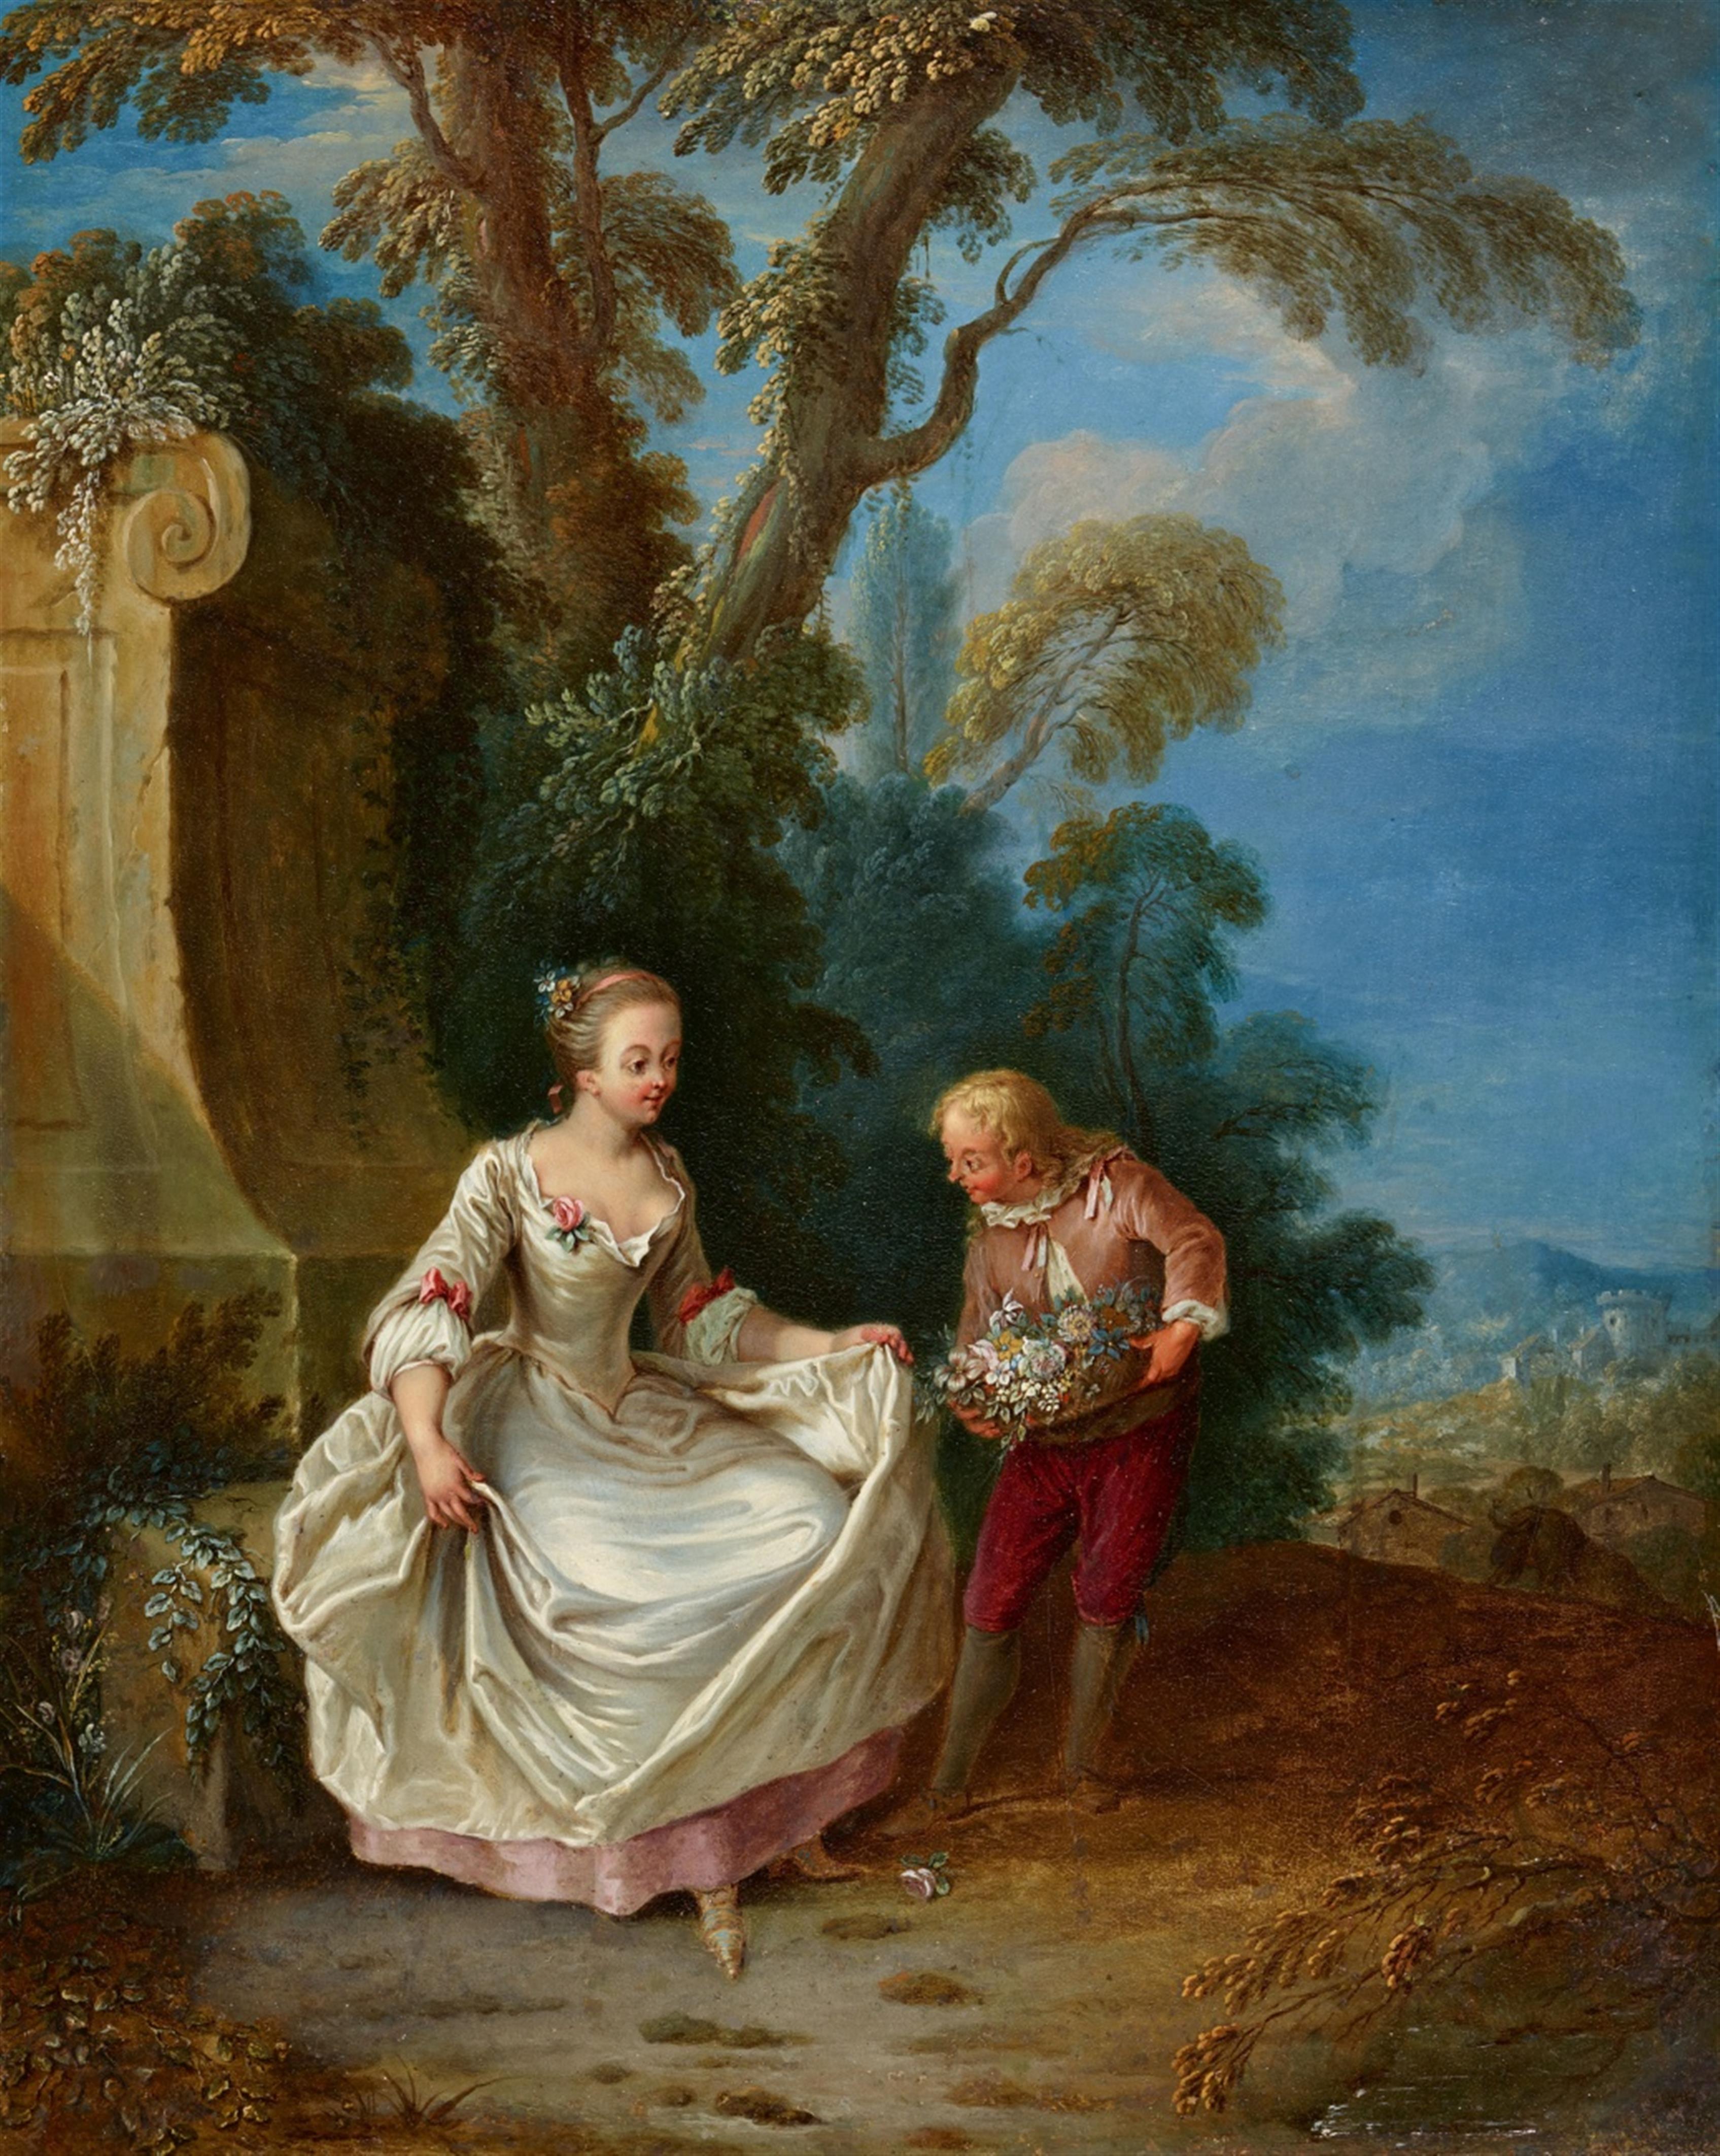 German or French artist 18th century - Courtship Scene in a Park - image-1